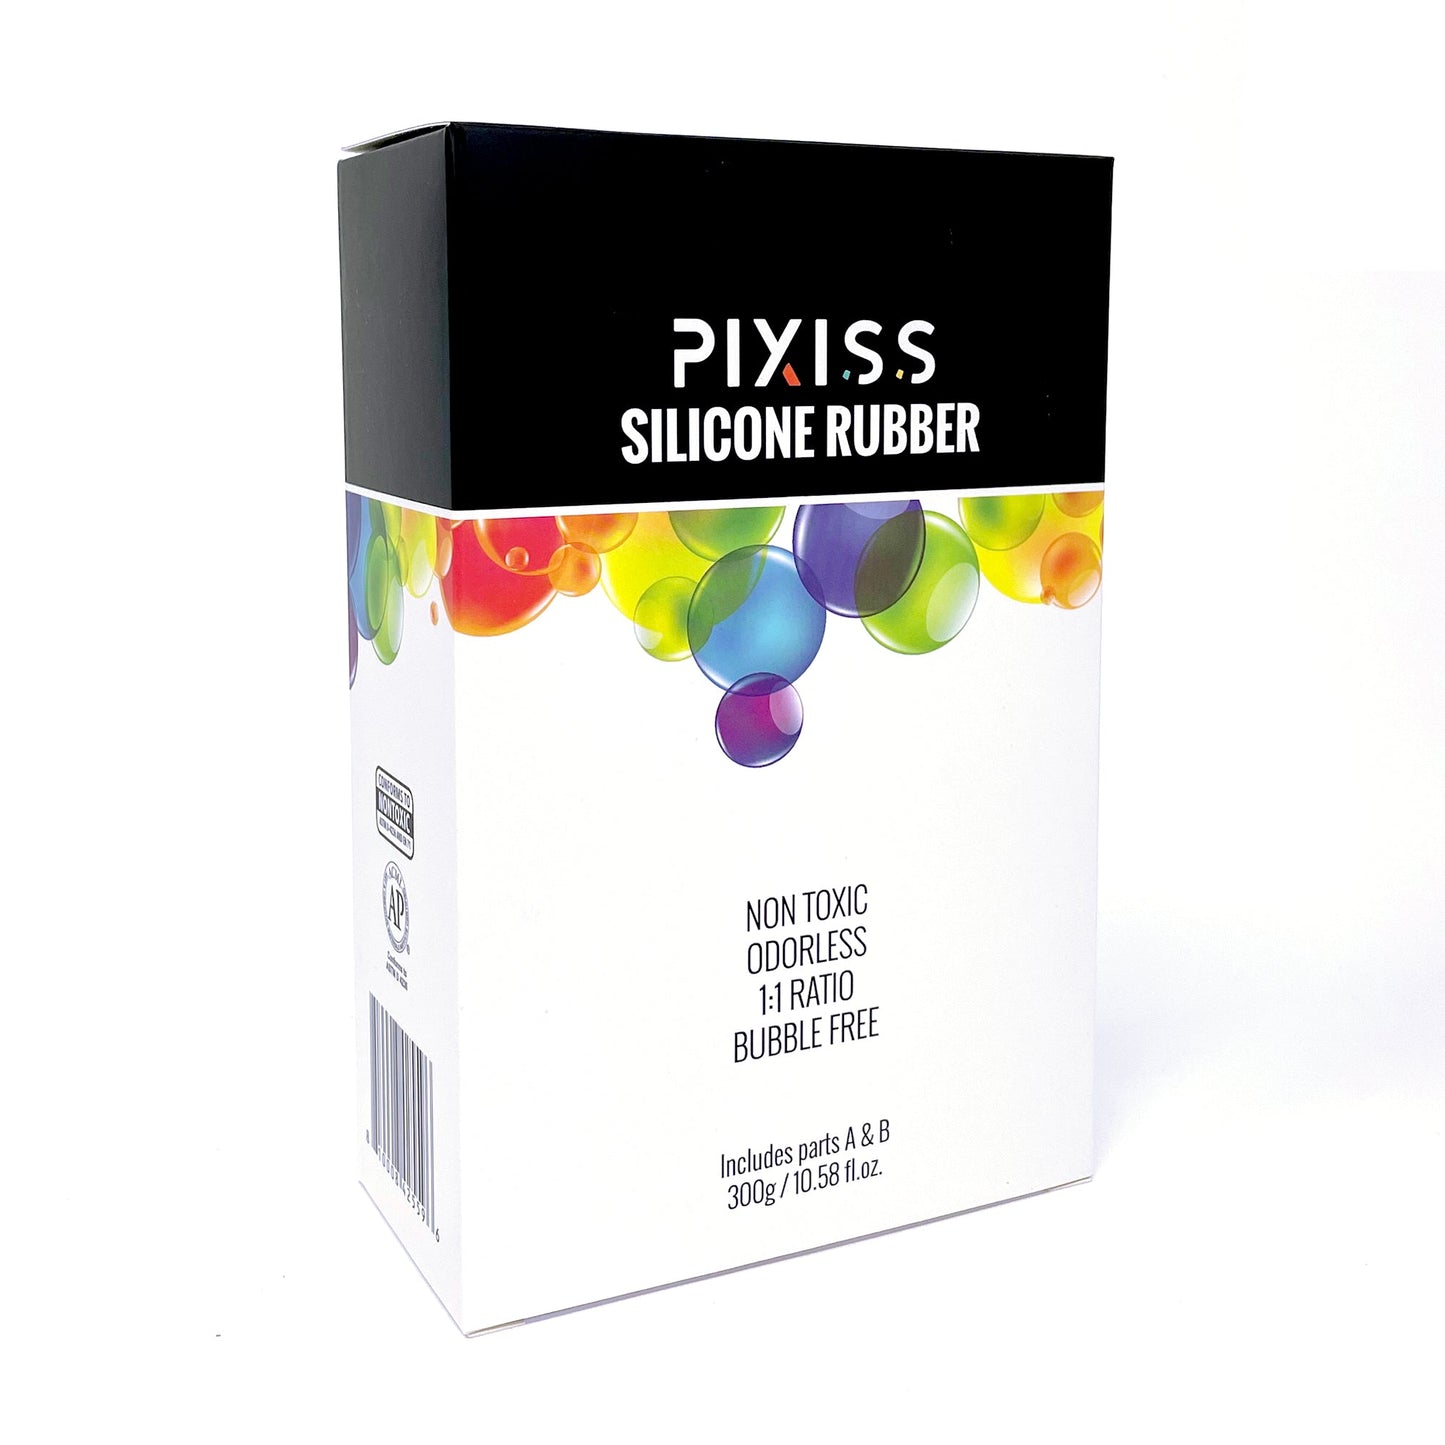 PIXISS Liquid Silicone Rubber For Mold Making - 21.16 oz. Kit by Pixiss